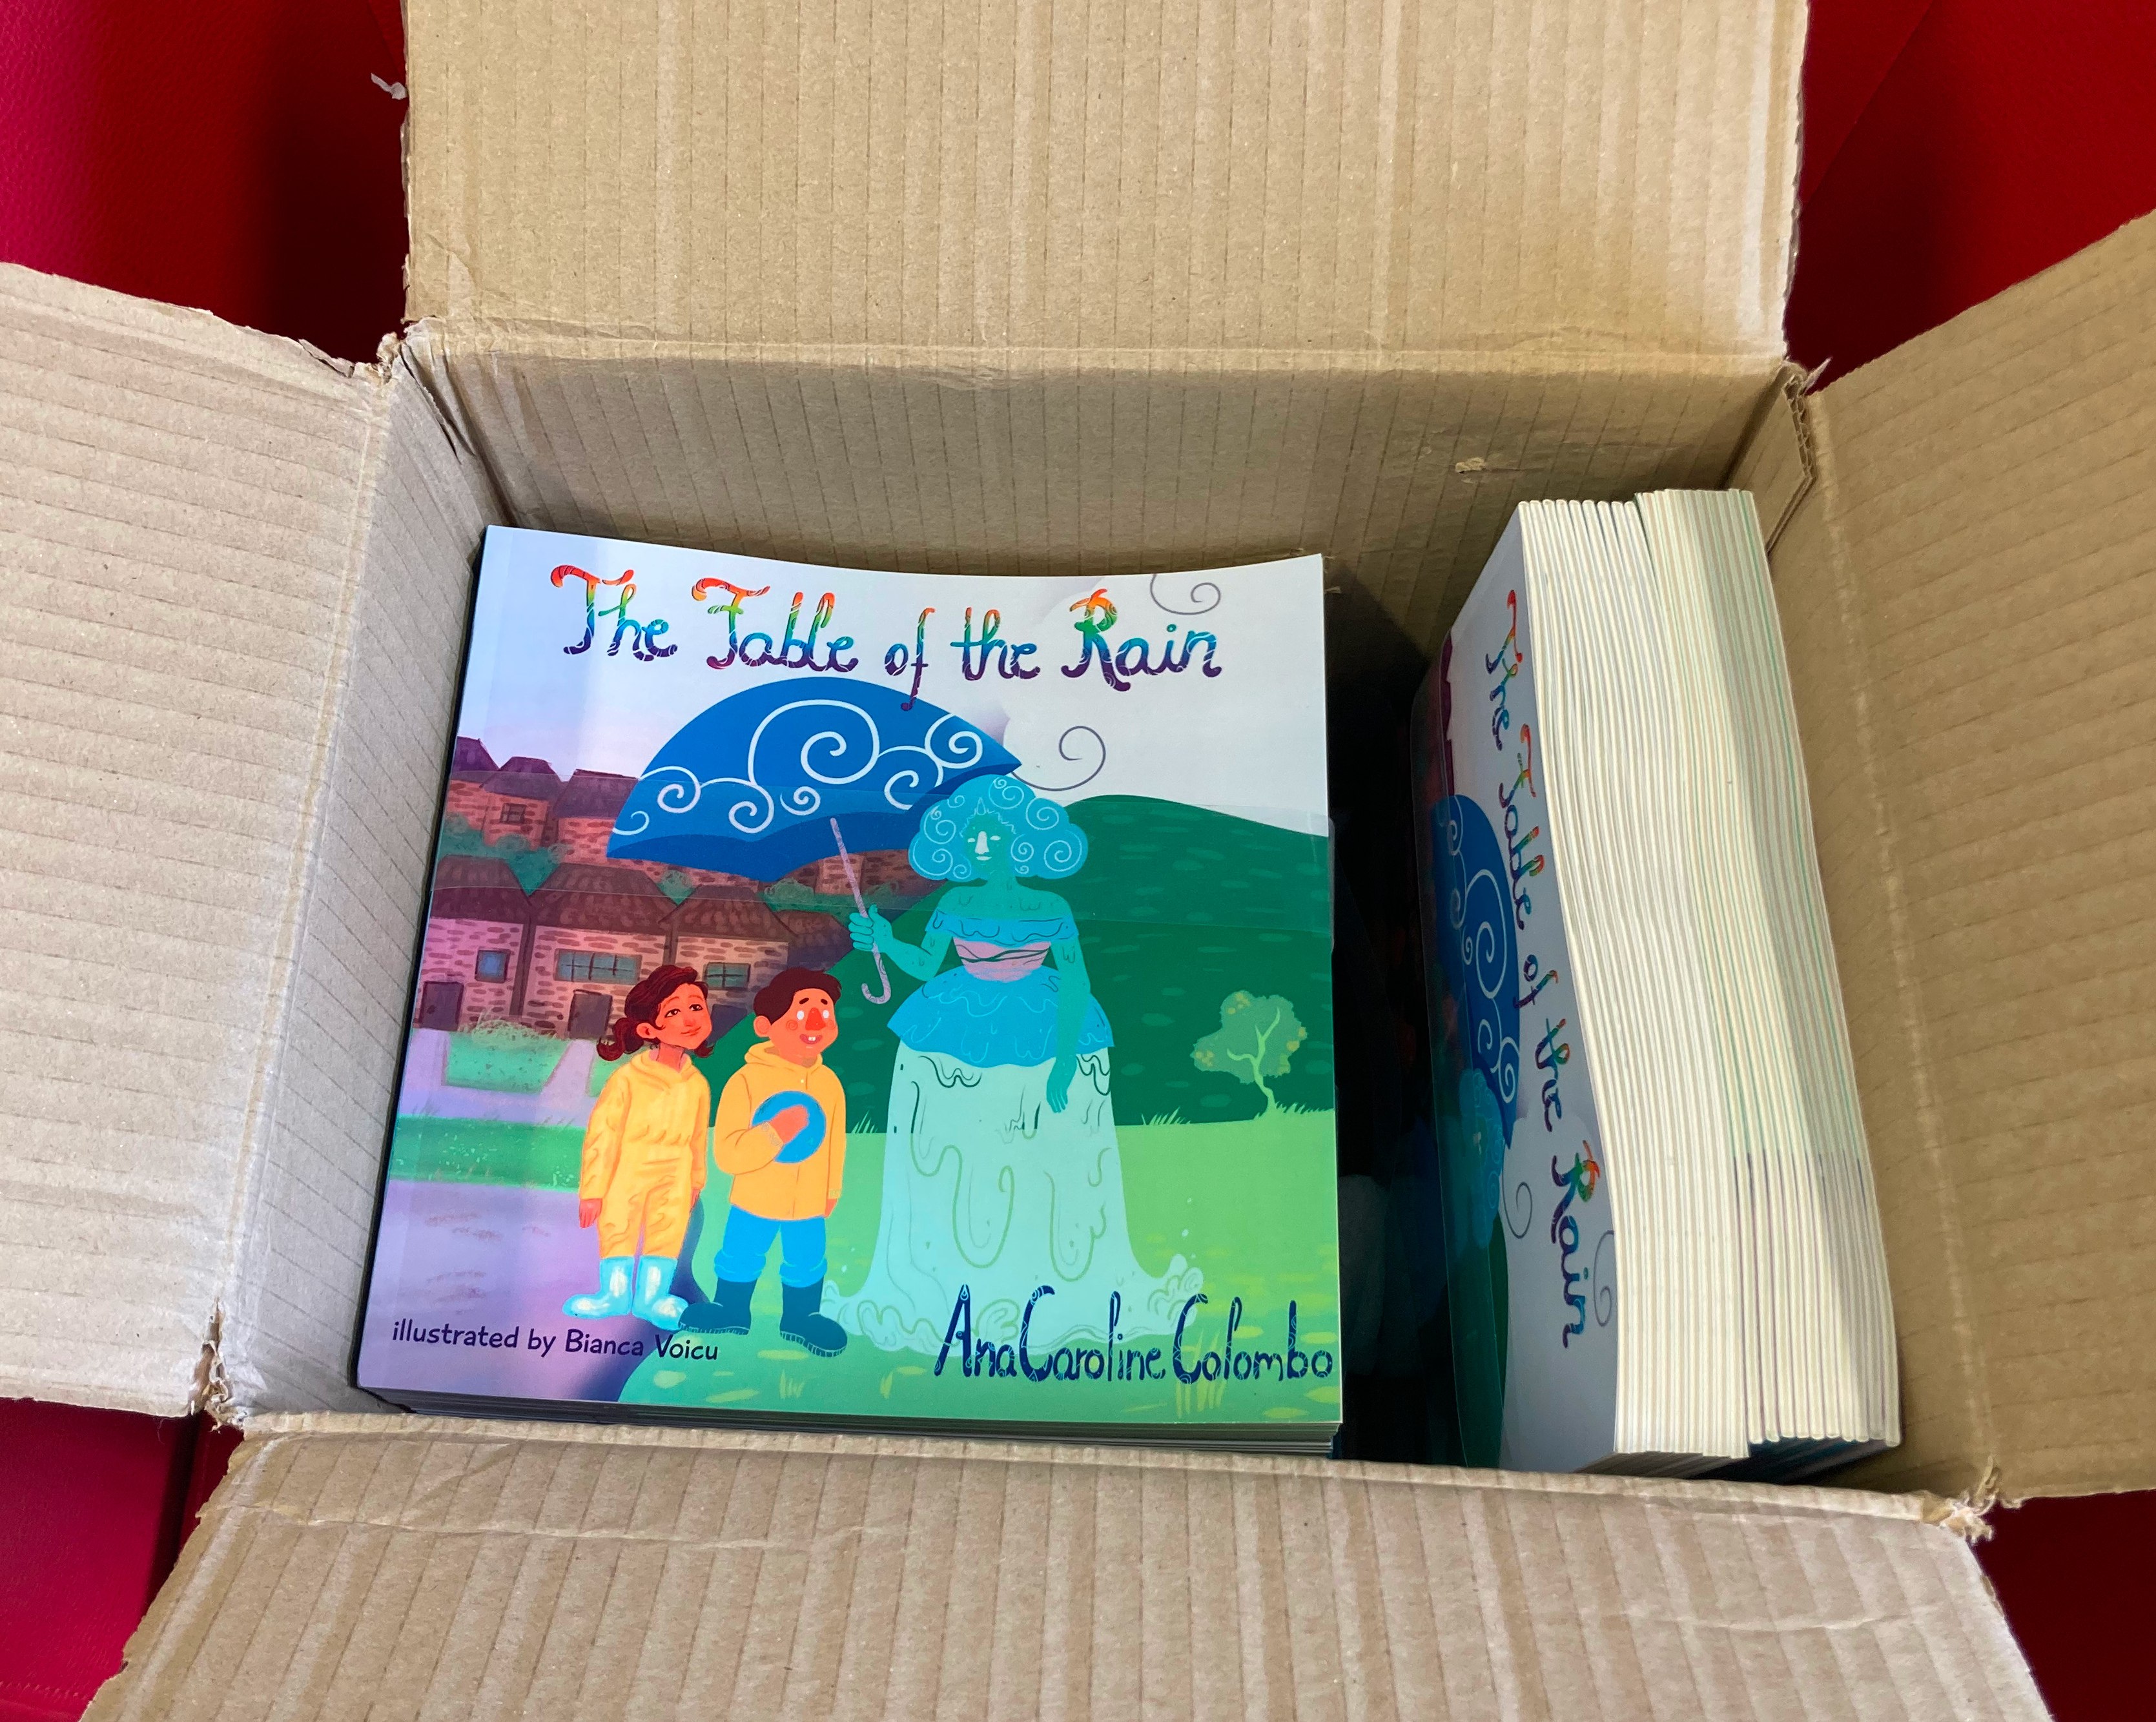 A box with some copies of the book I wrote